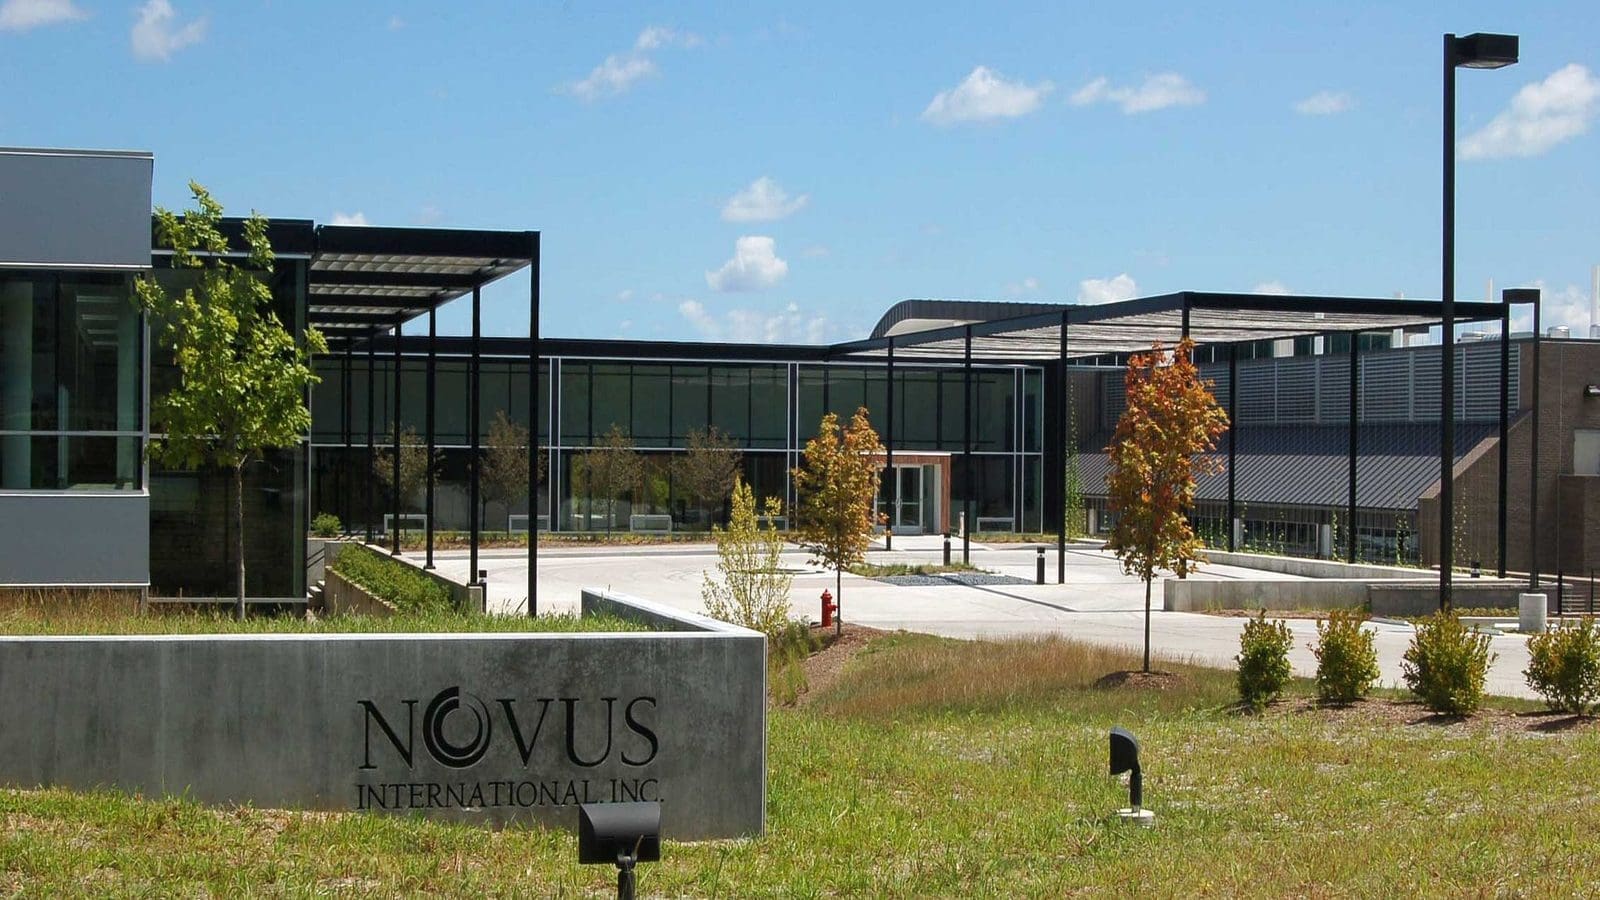 Novus  acquires biotech company Agrivida, to accelerate development of innovative animal nutrition products